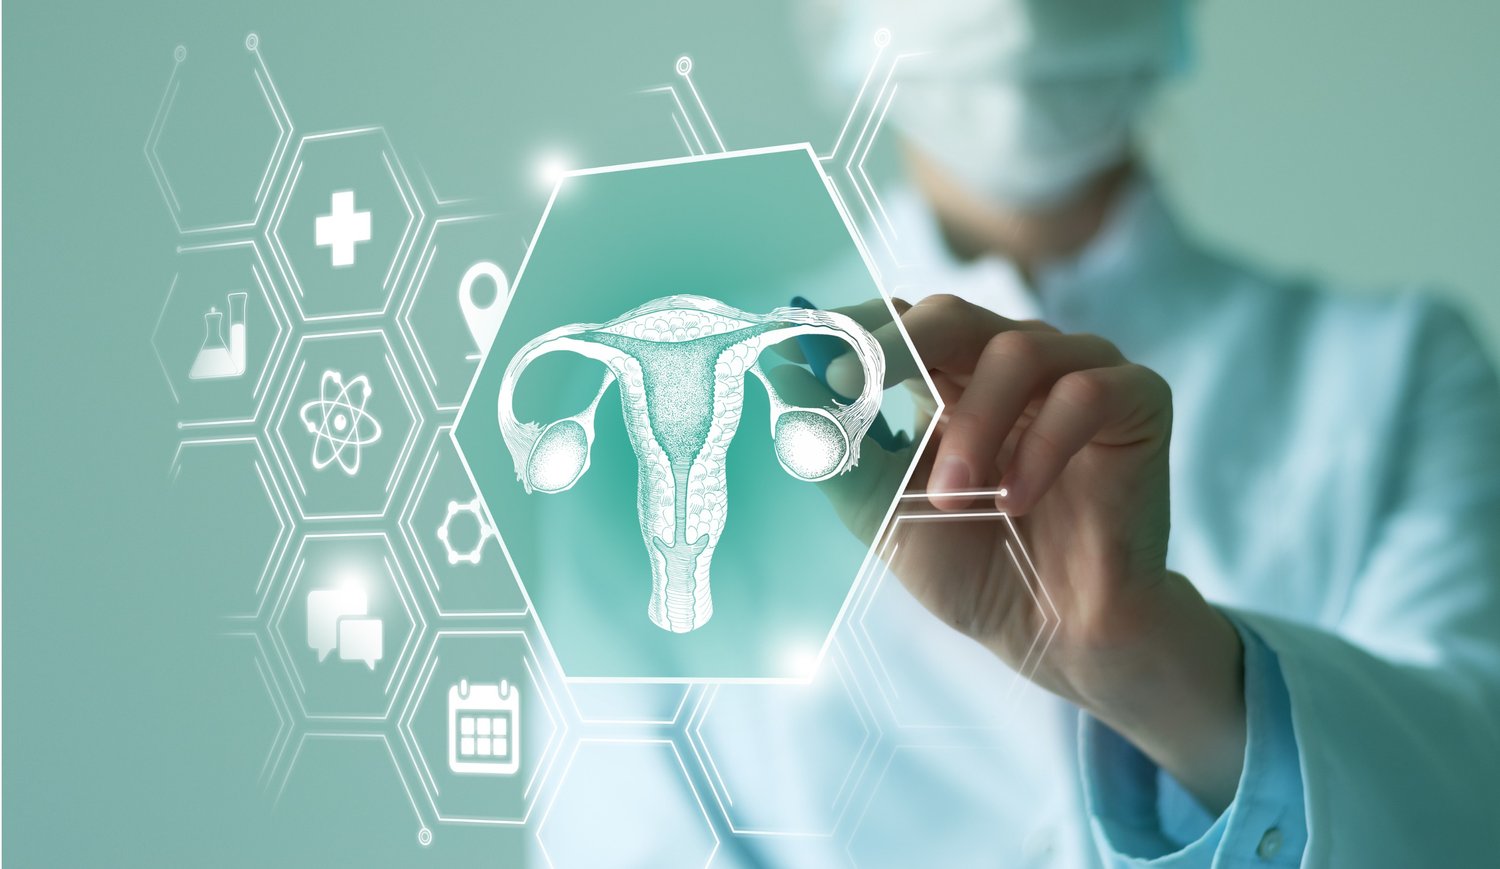 Medical professional with image of uterus